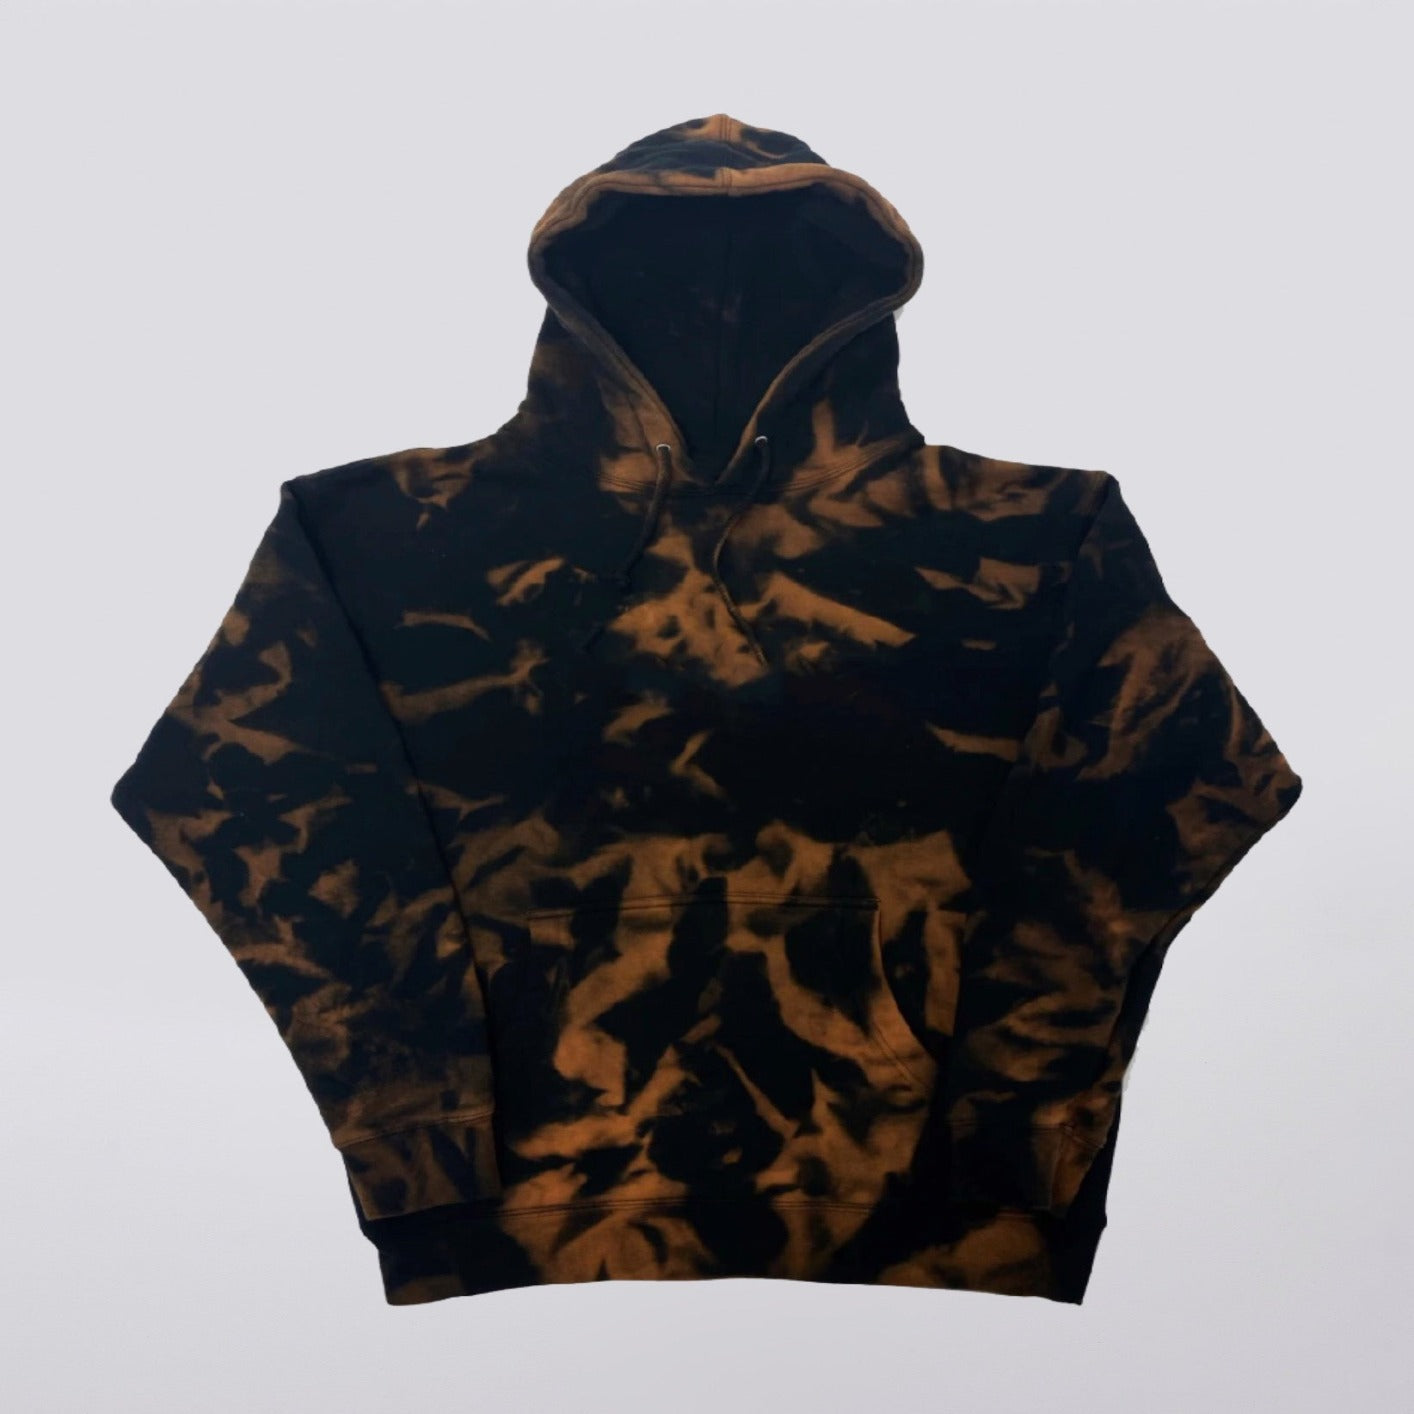 Black Bleached dyed pullover hoodie from MFG Merch - Hand dyed pullover Hoodie to ensure each item is unique  - MFG Merch 